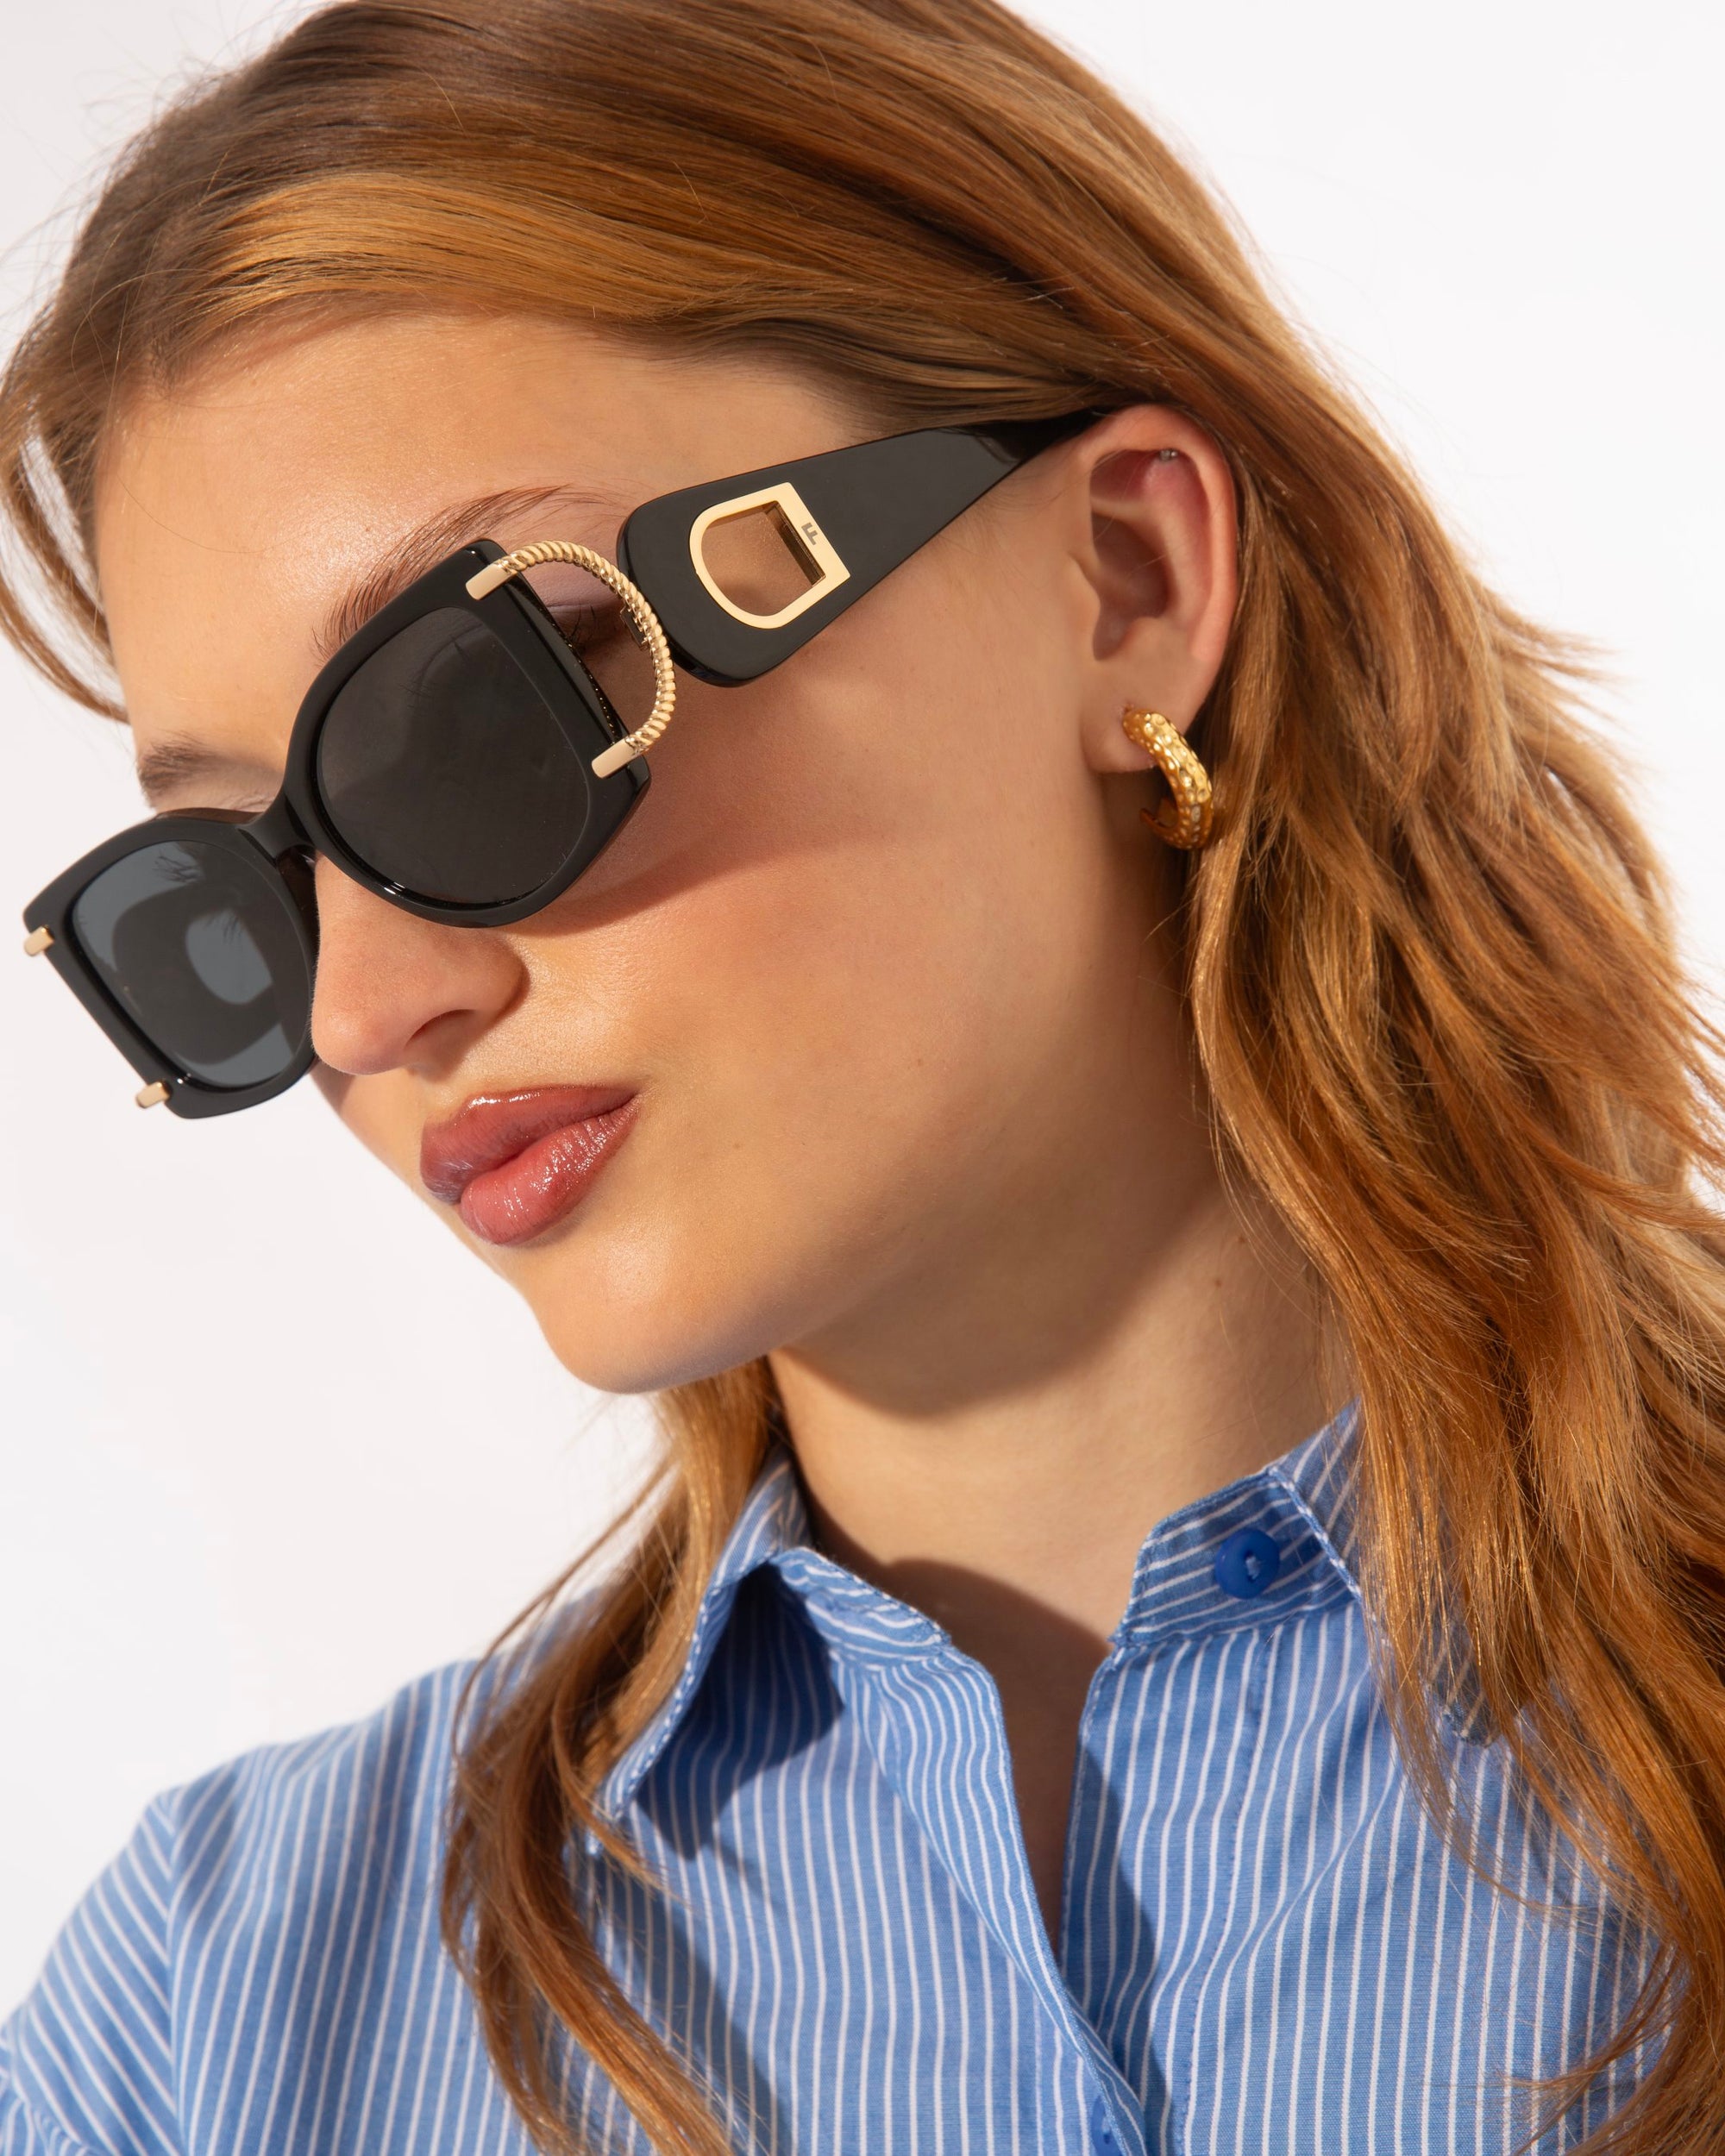 A person with long, wavy brown hair wears black, gold-plated For Art&#39;s Sake® Sculpture sunglasses with UV protection and a blue and white striped shirt. They also sport a gold hoop earring, and their head is tilted slightly to the left. The background is plain white.